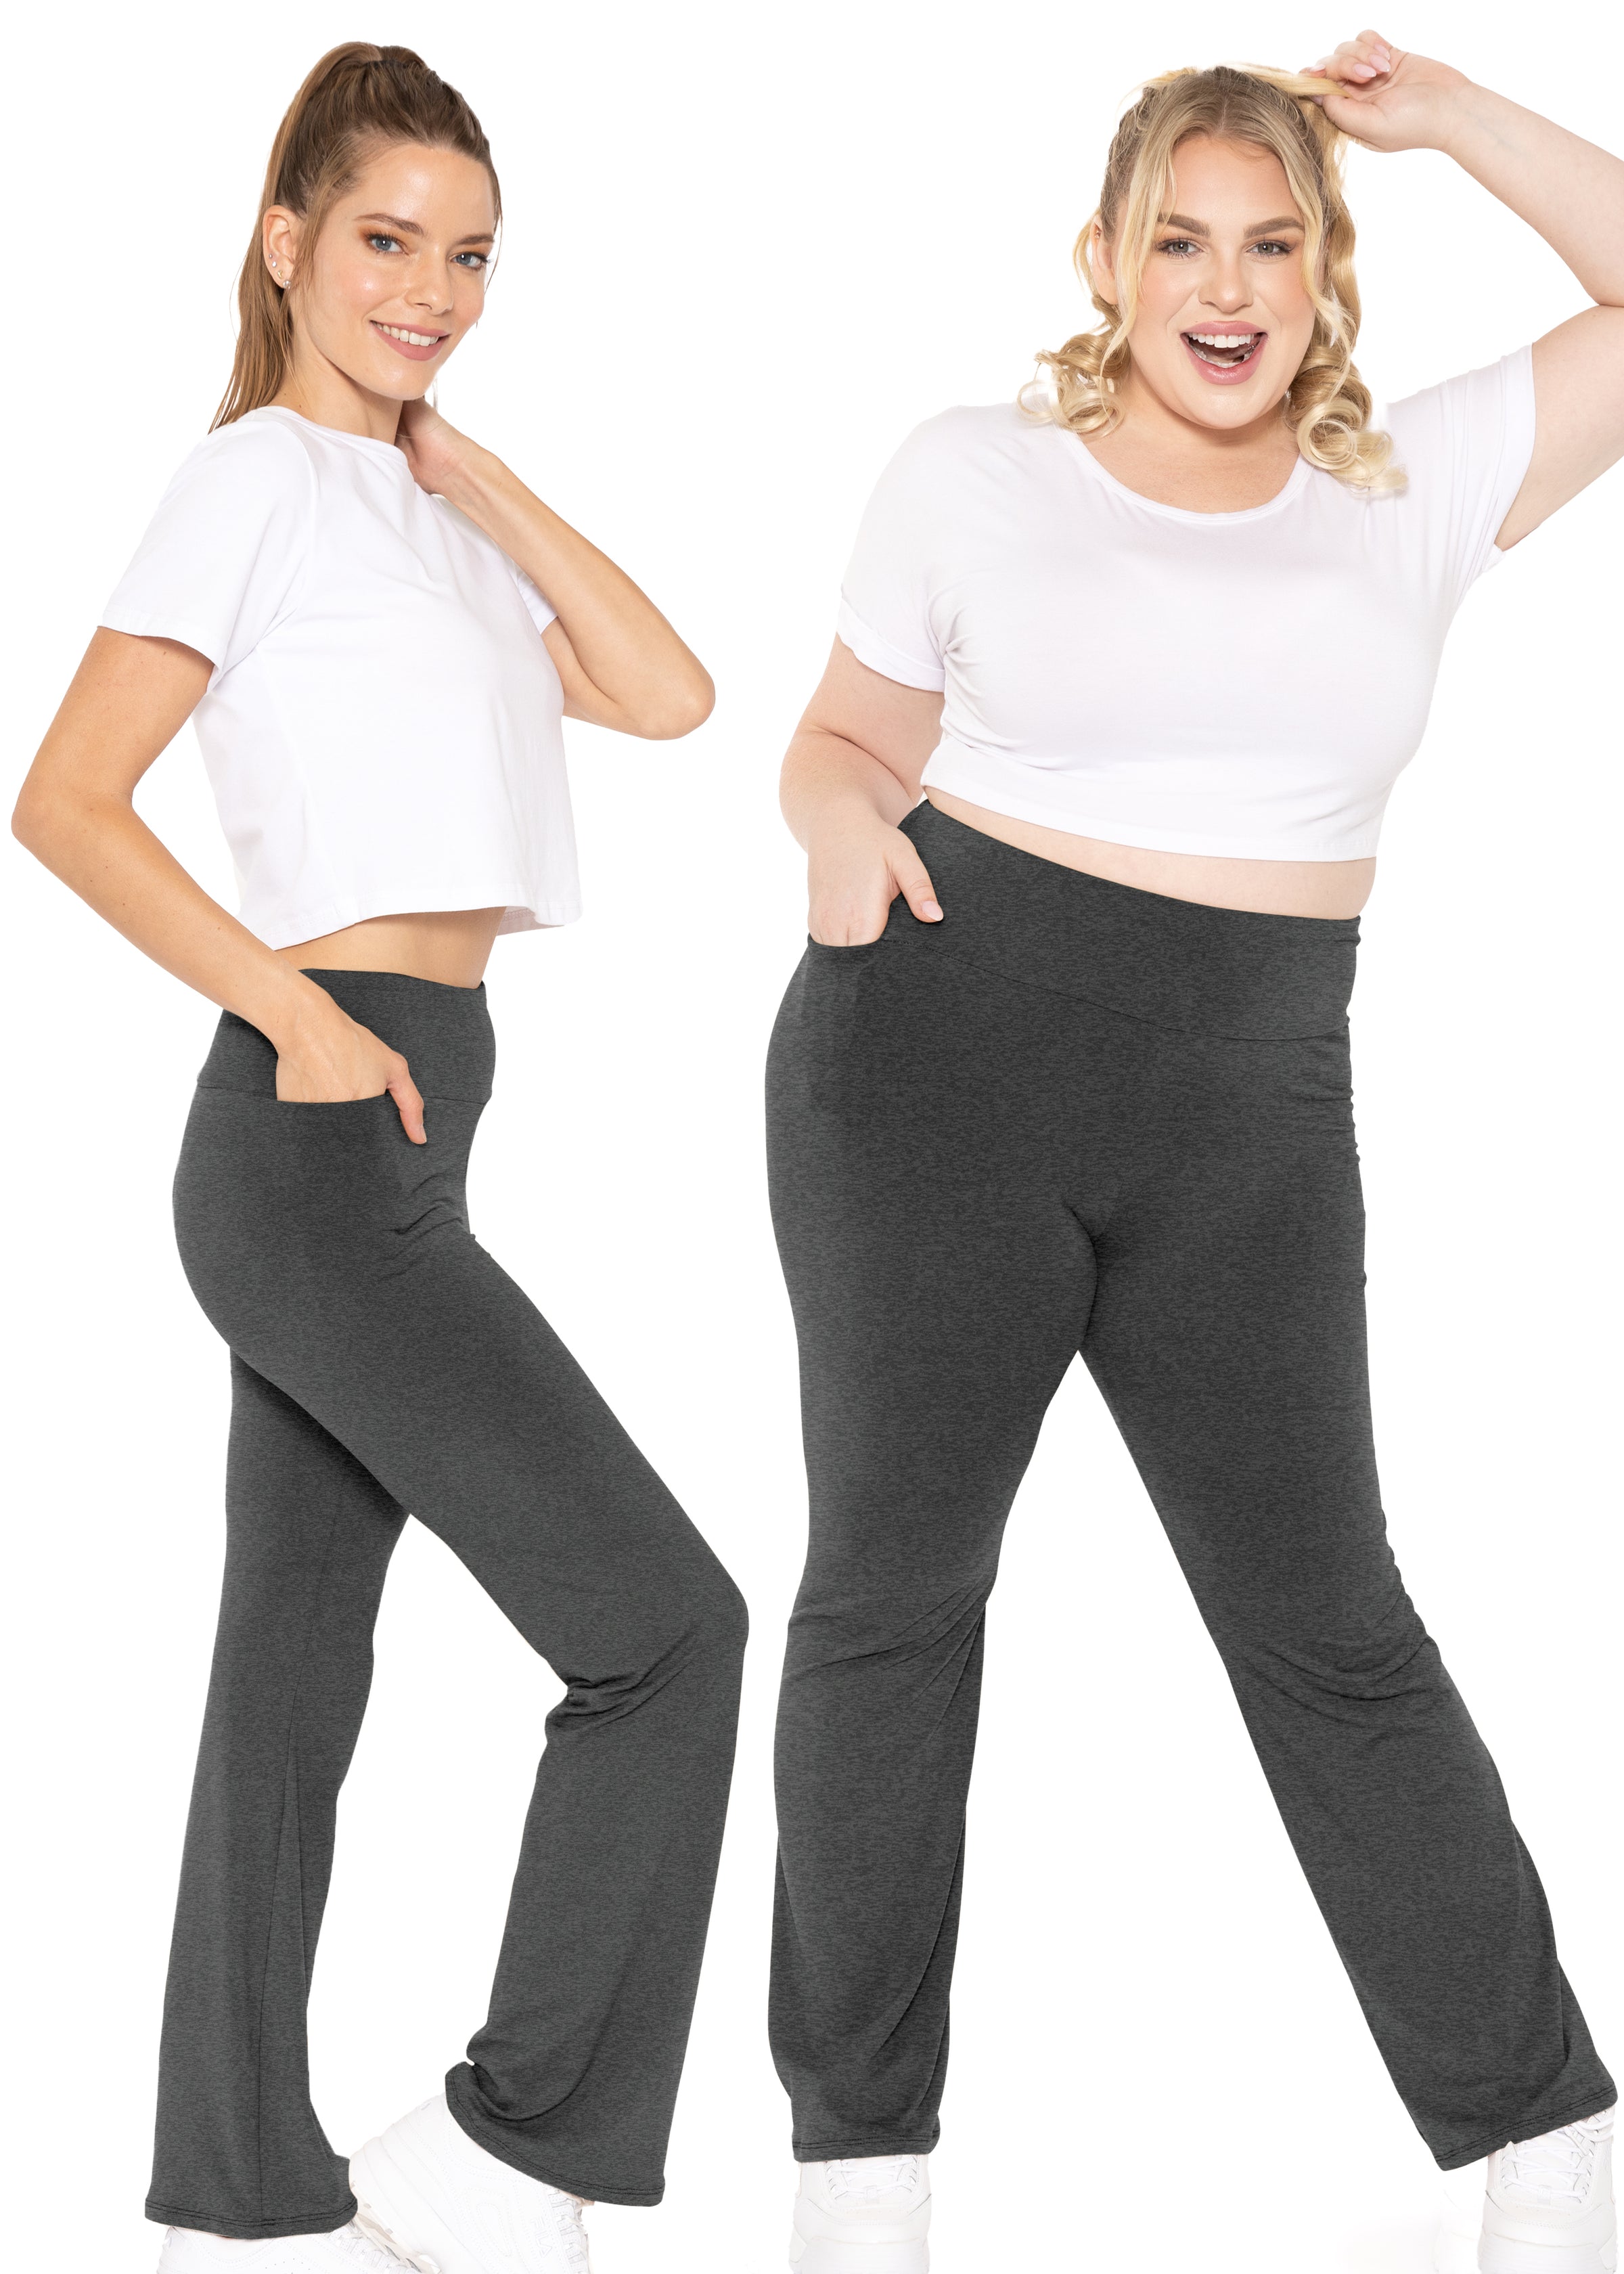 Buy bootcut yoga pants that can take you from the office to the